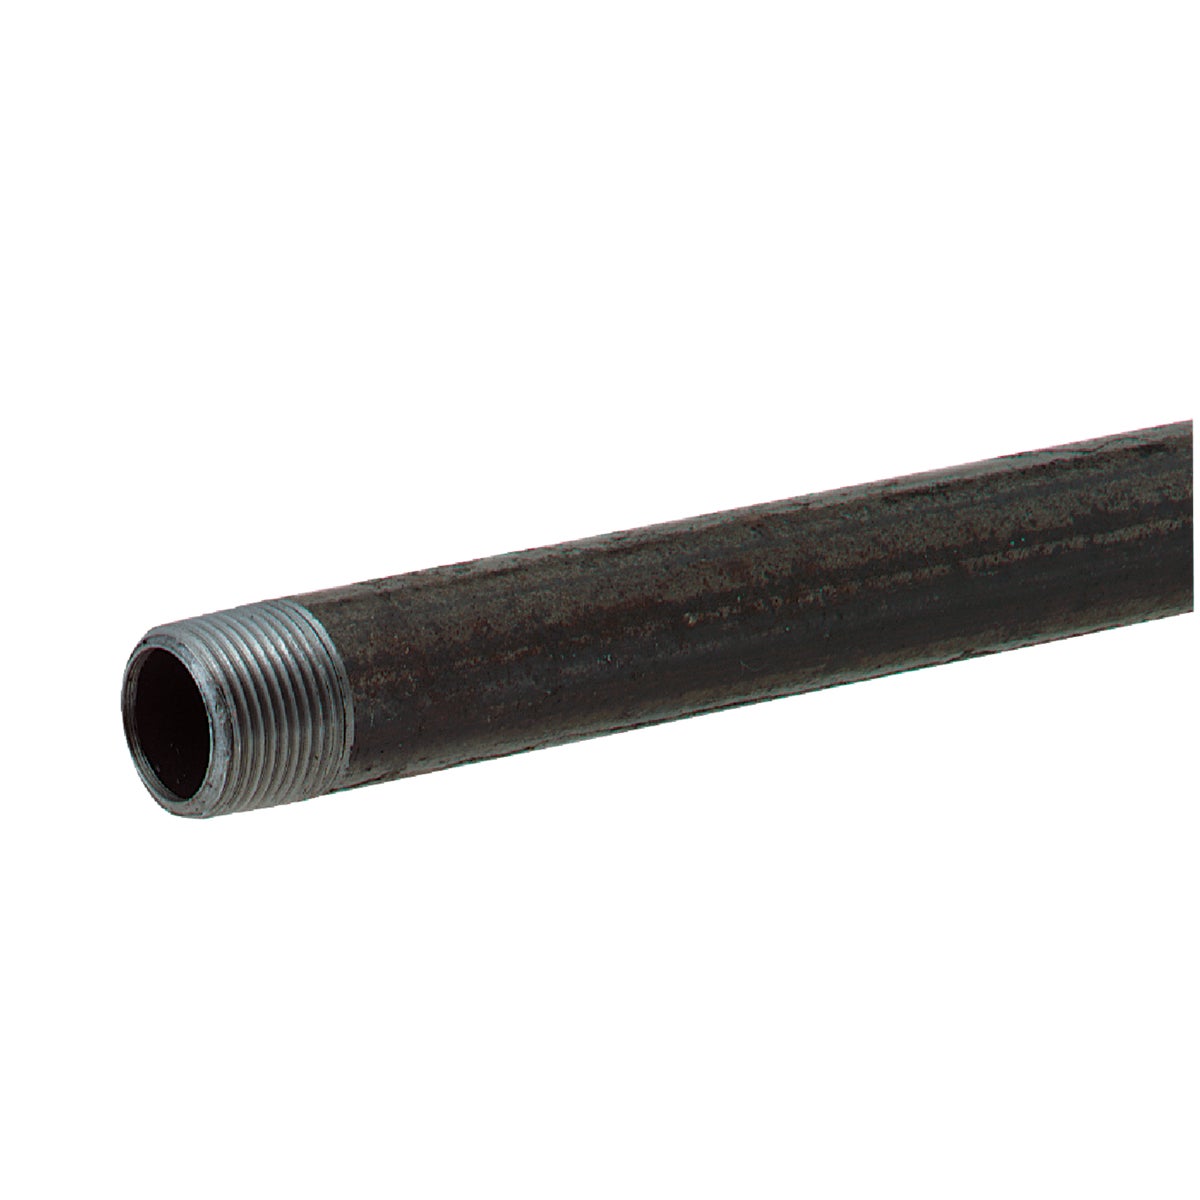 Southland 2 In. x 36 In. Carbon Steel Threaded Black Pipe